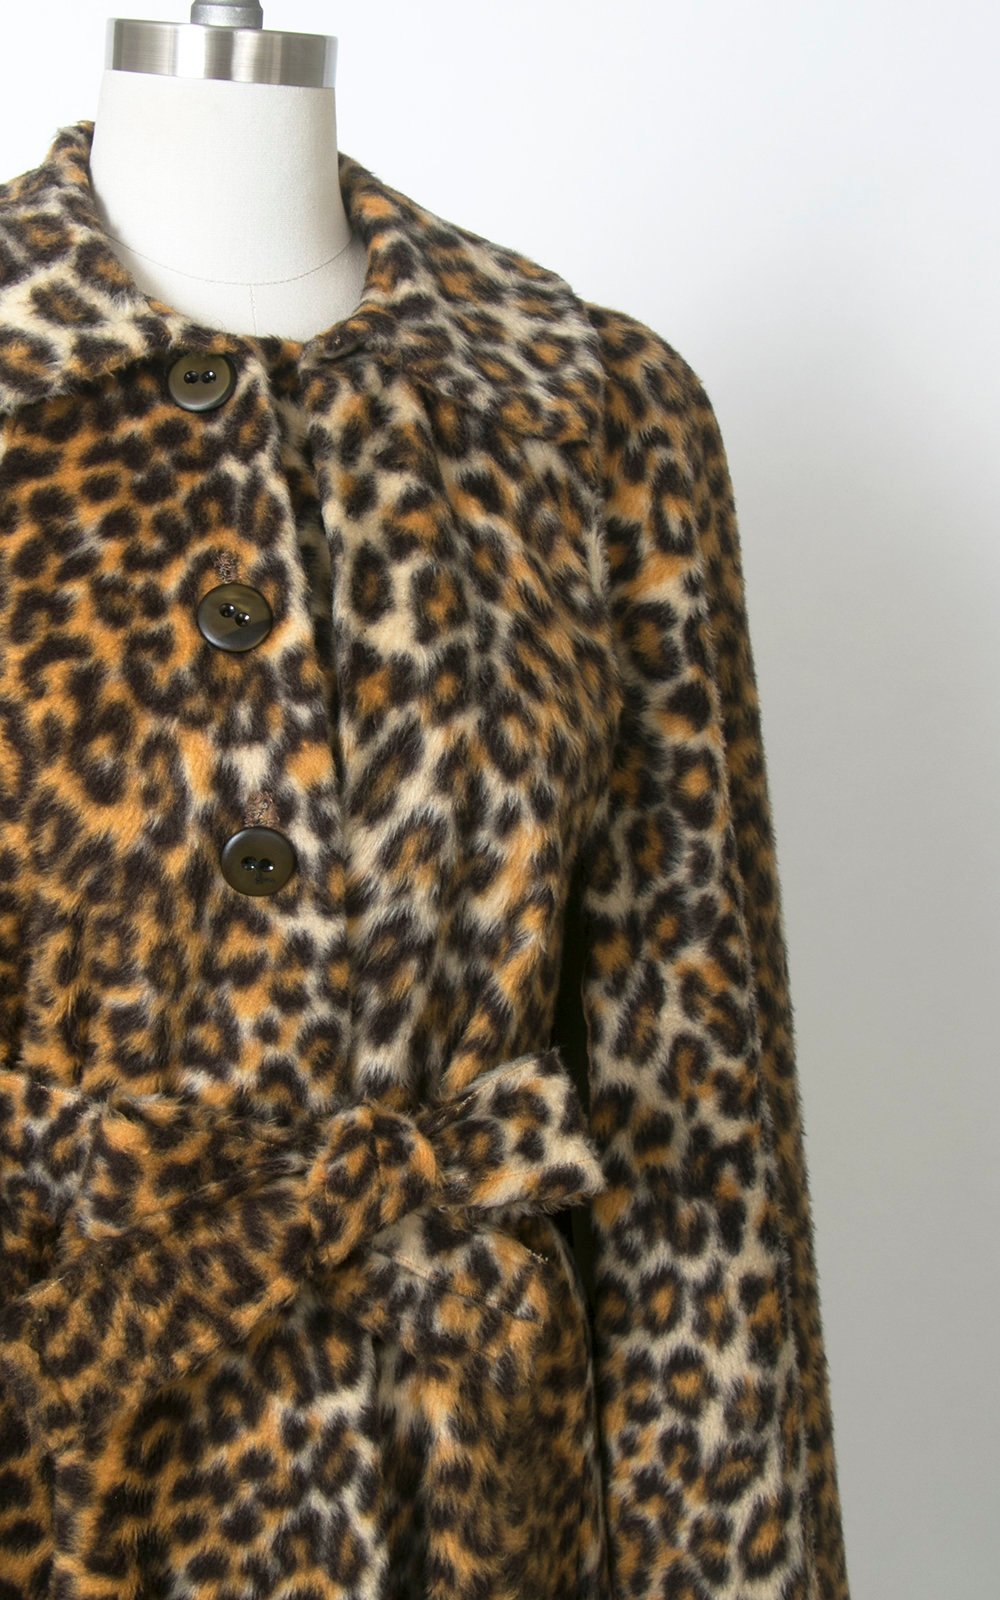 Vintage 1970s Cape | 70s Leopard Print Faux Fur Belted Animal Print Poncho Swing Coat (small/medium/large)